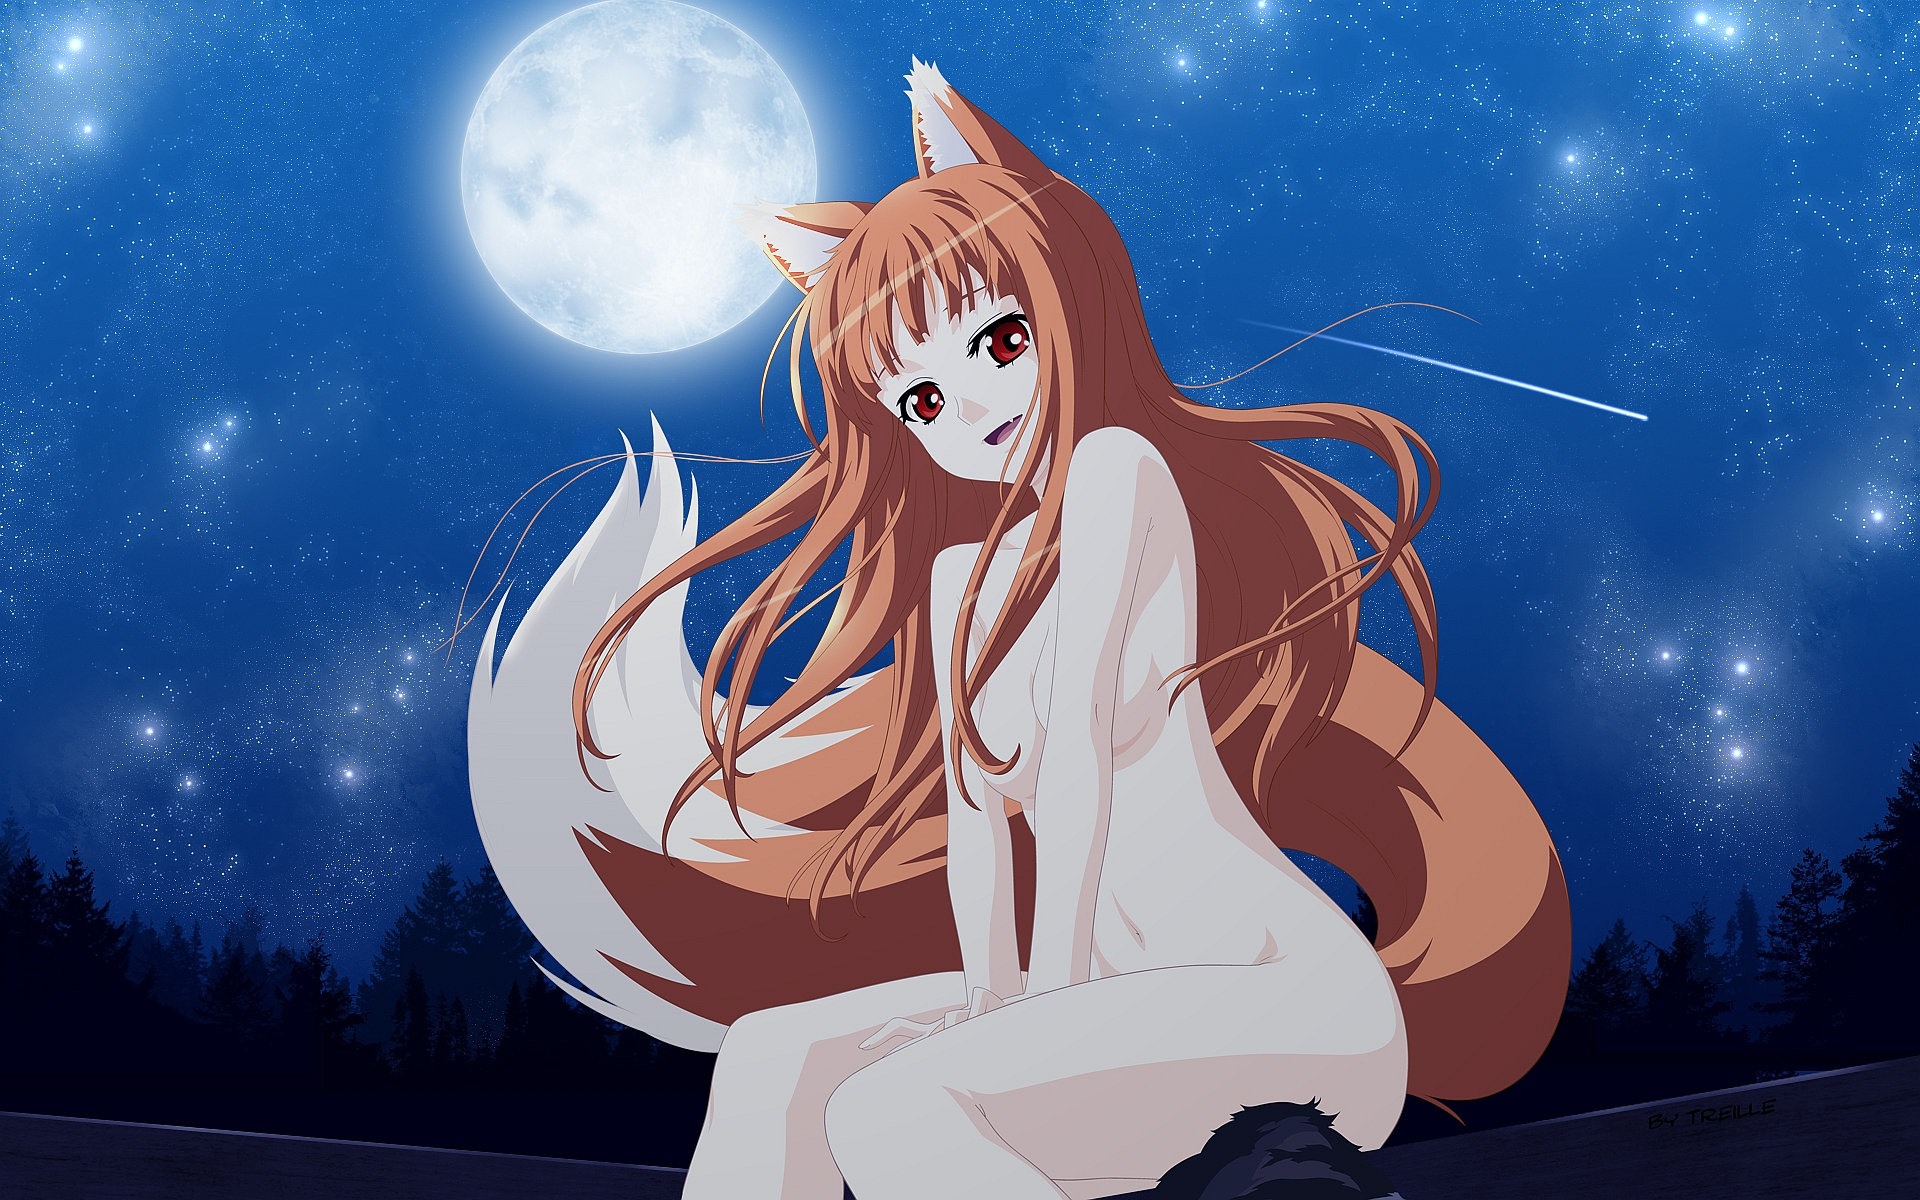 Spice and Wolf HD wallpapers #7 - 1920x1200